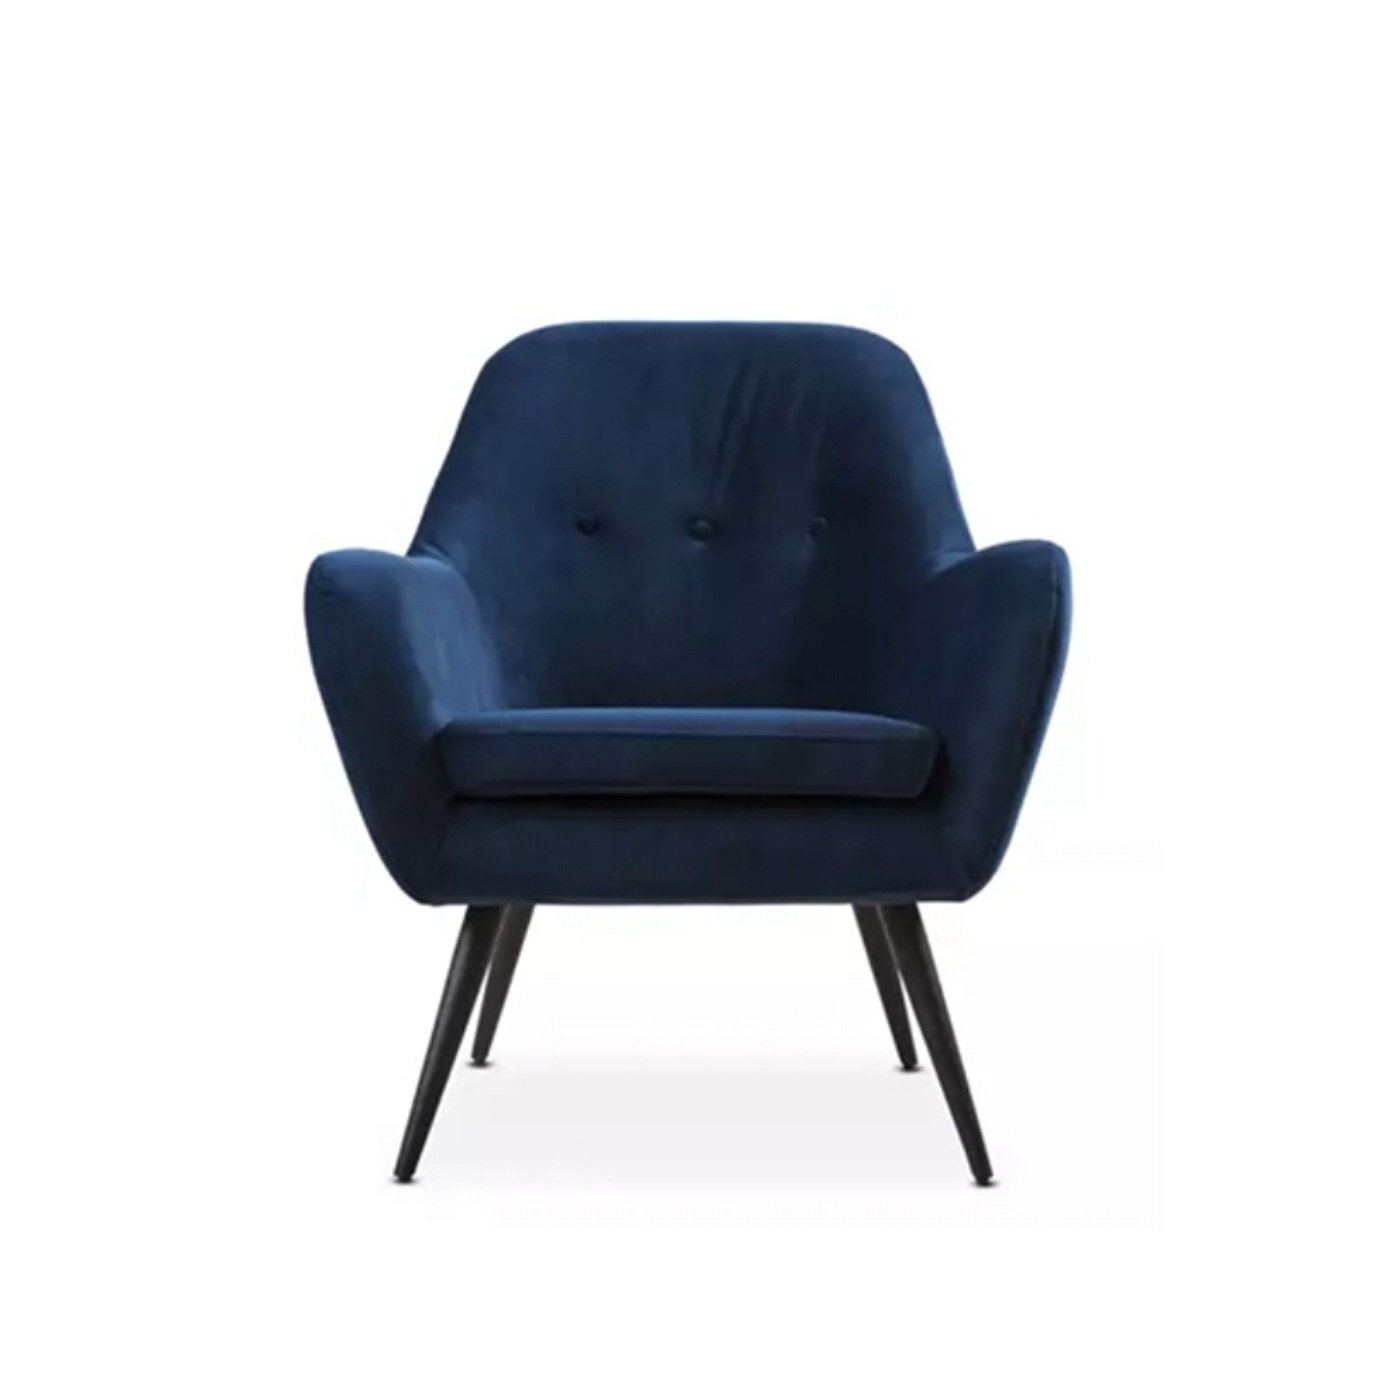 Blue Occasional Chair With High Black Legs.